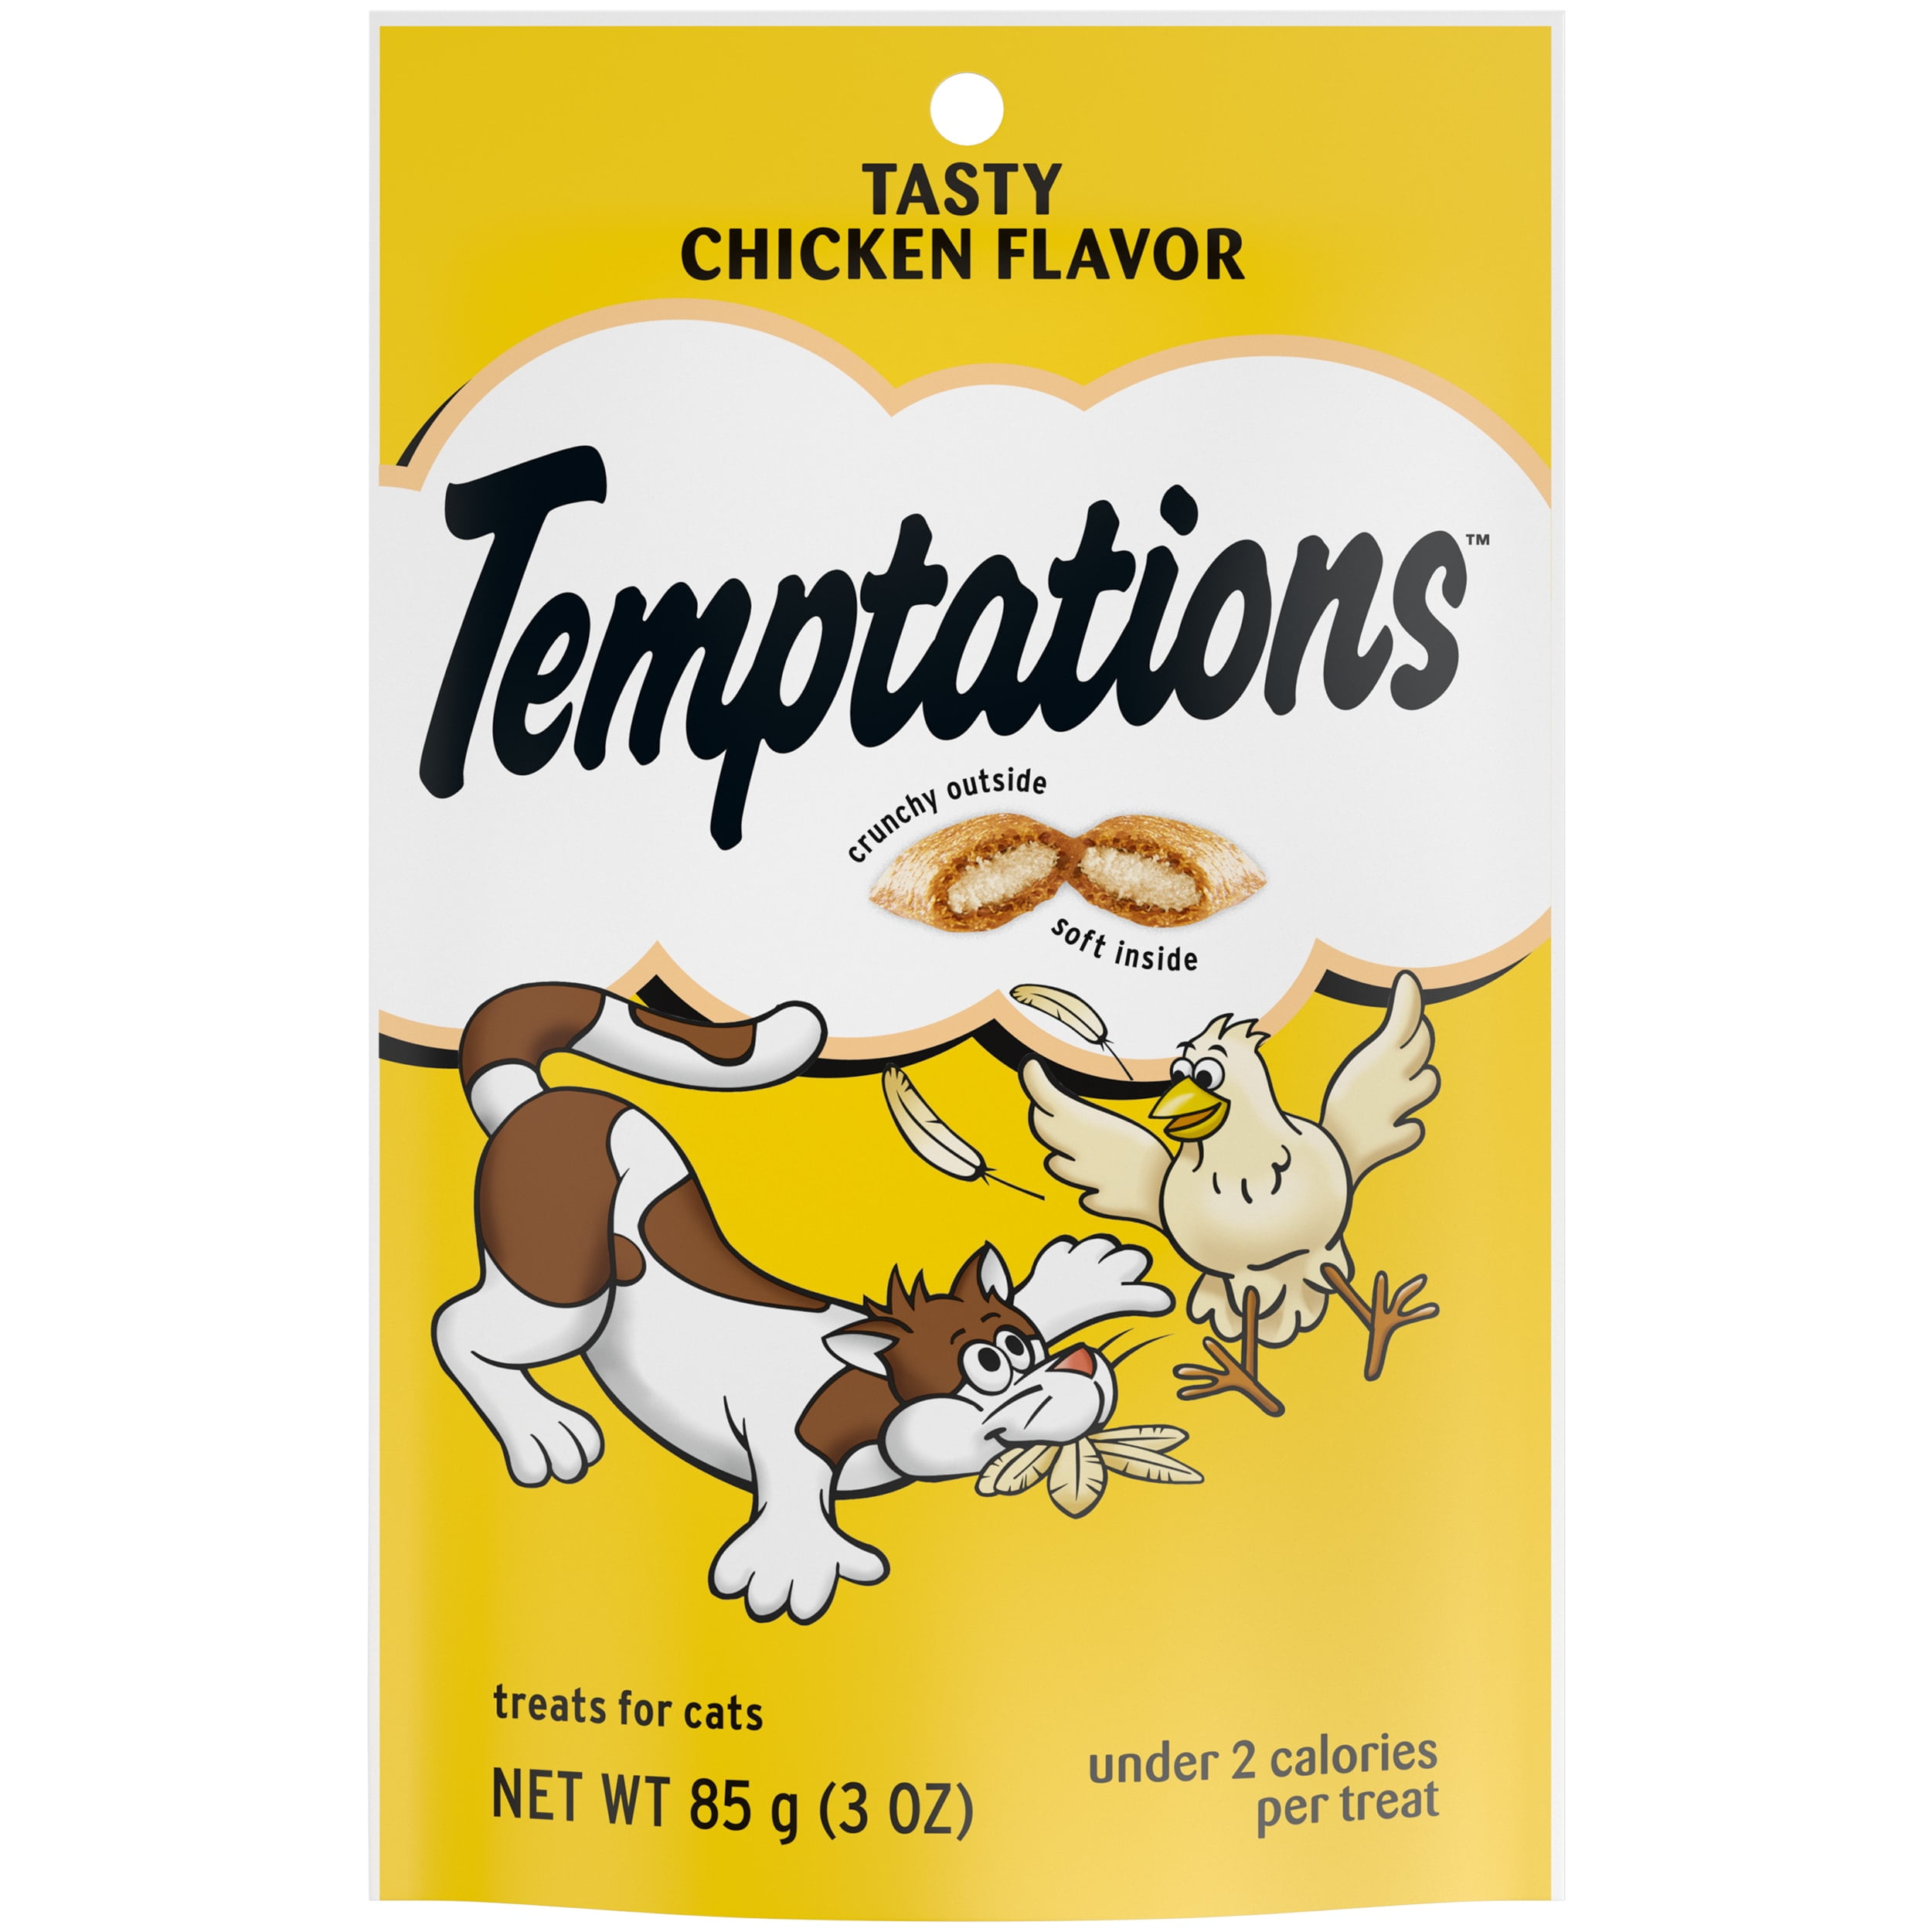 TEMPTATIONS Classic Crunchy and Soft Cat Treats Tasty Chicken Flavor, 3 oz. Pouch